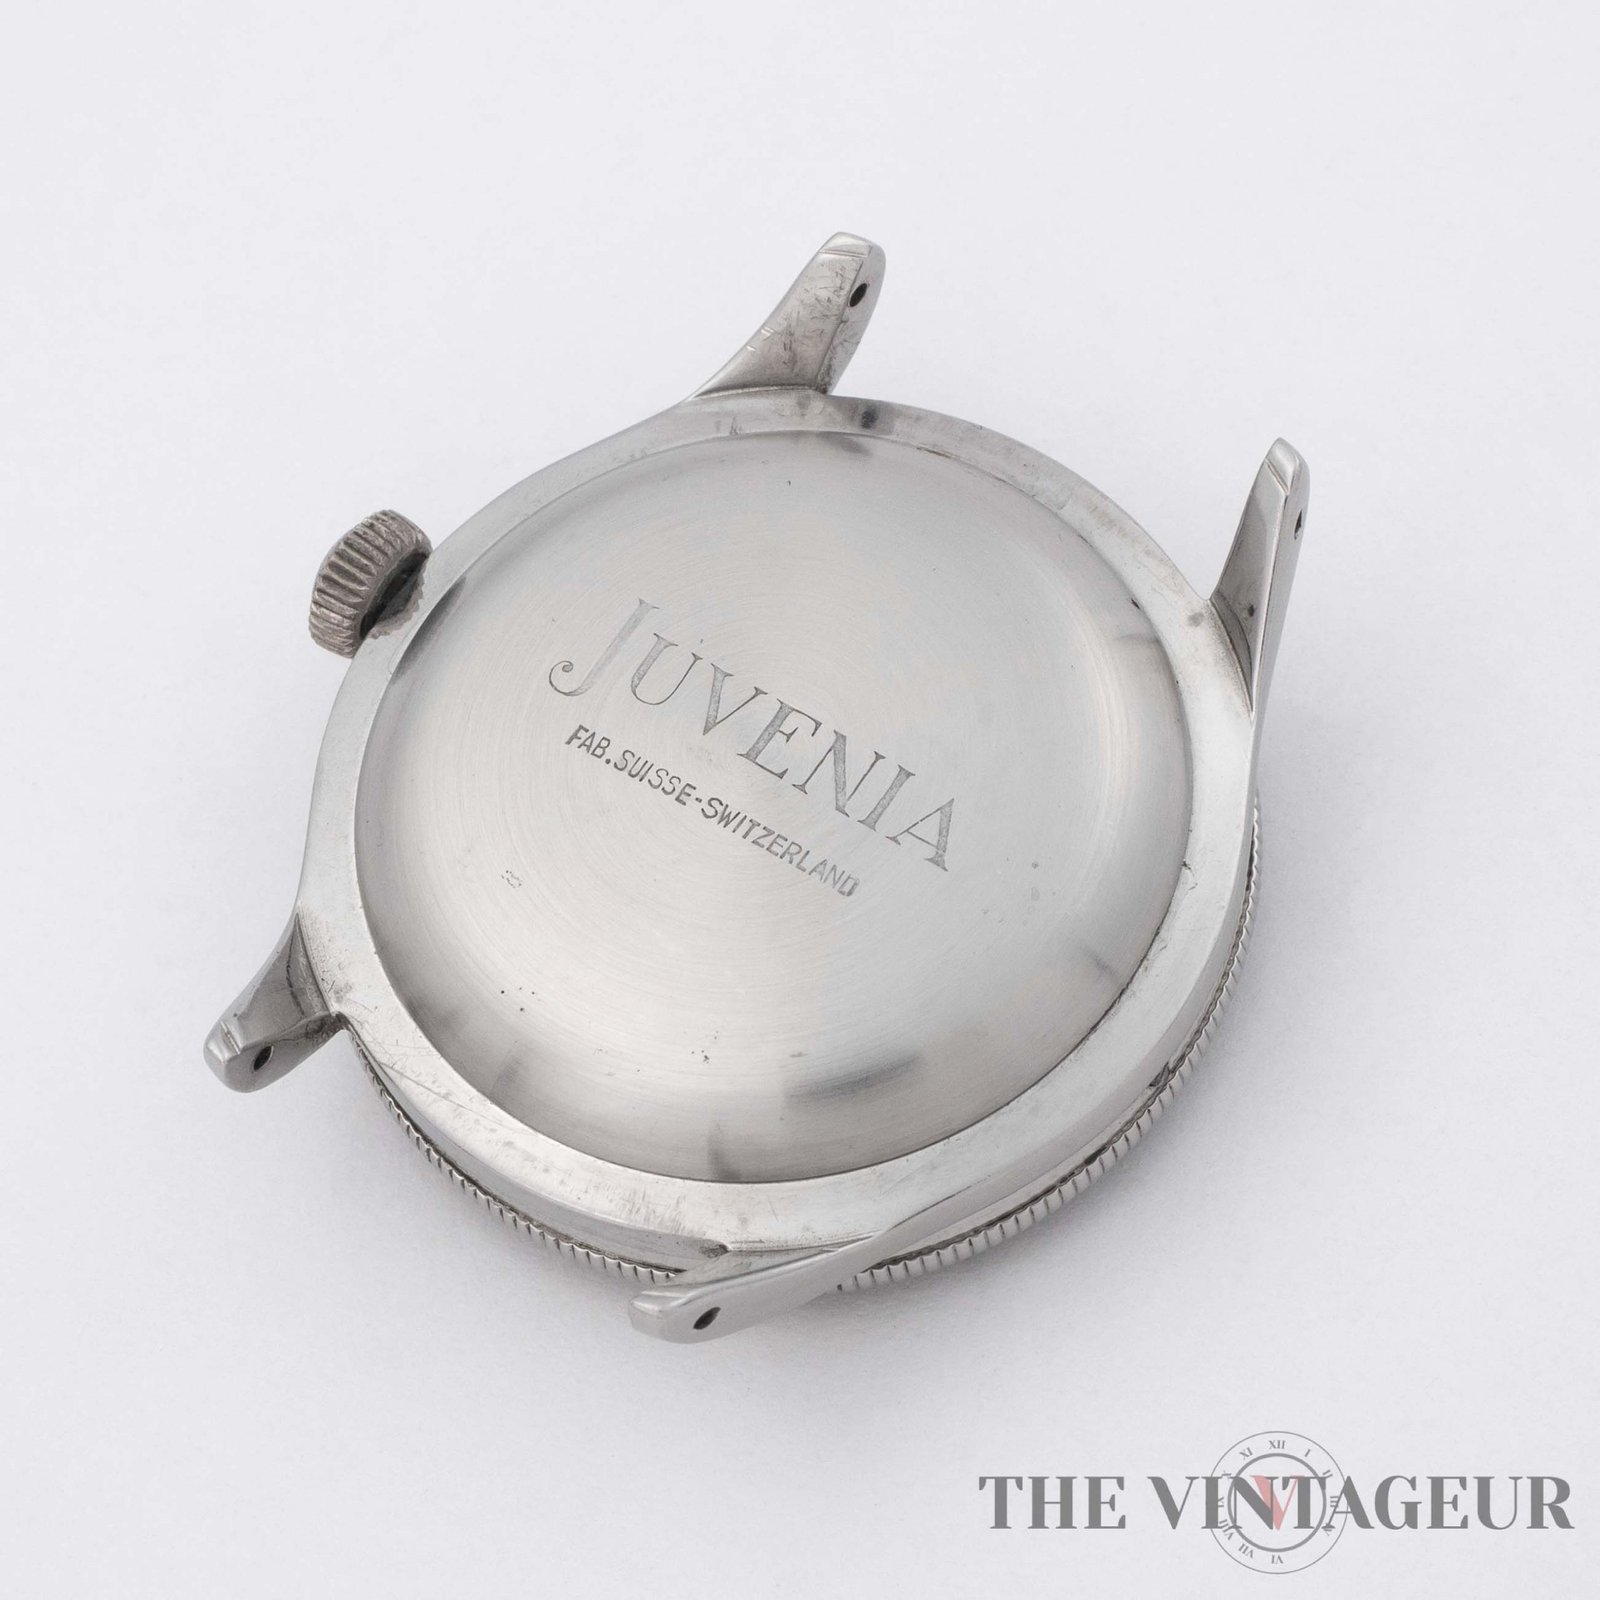 Juvenia was founded in 1860 by Jacques Didisheim-Goldschmidt in Saint-Imier, Switzerland - Juvenia - Arithmo - The Vintageur - Collectible watches and more